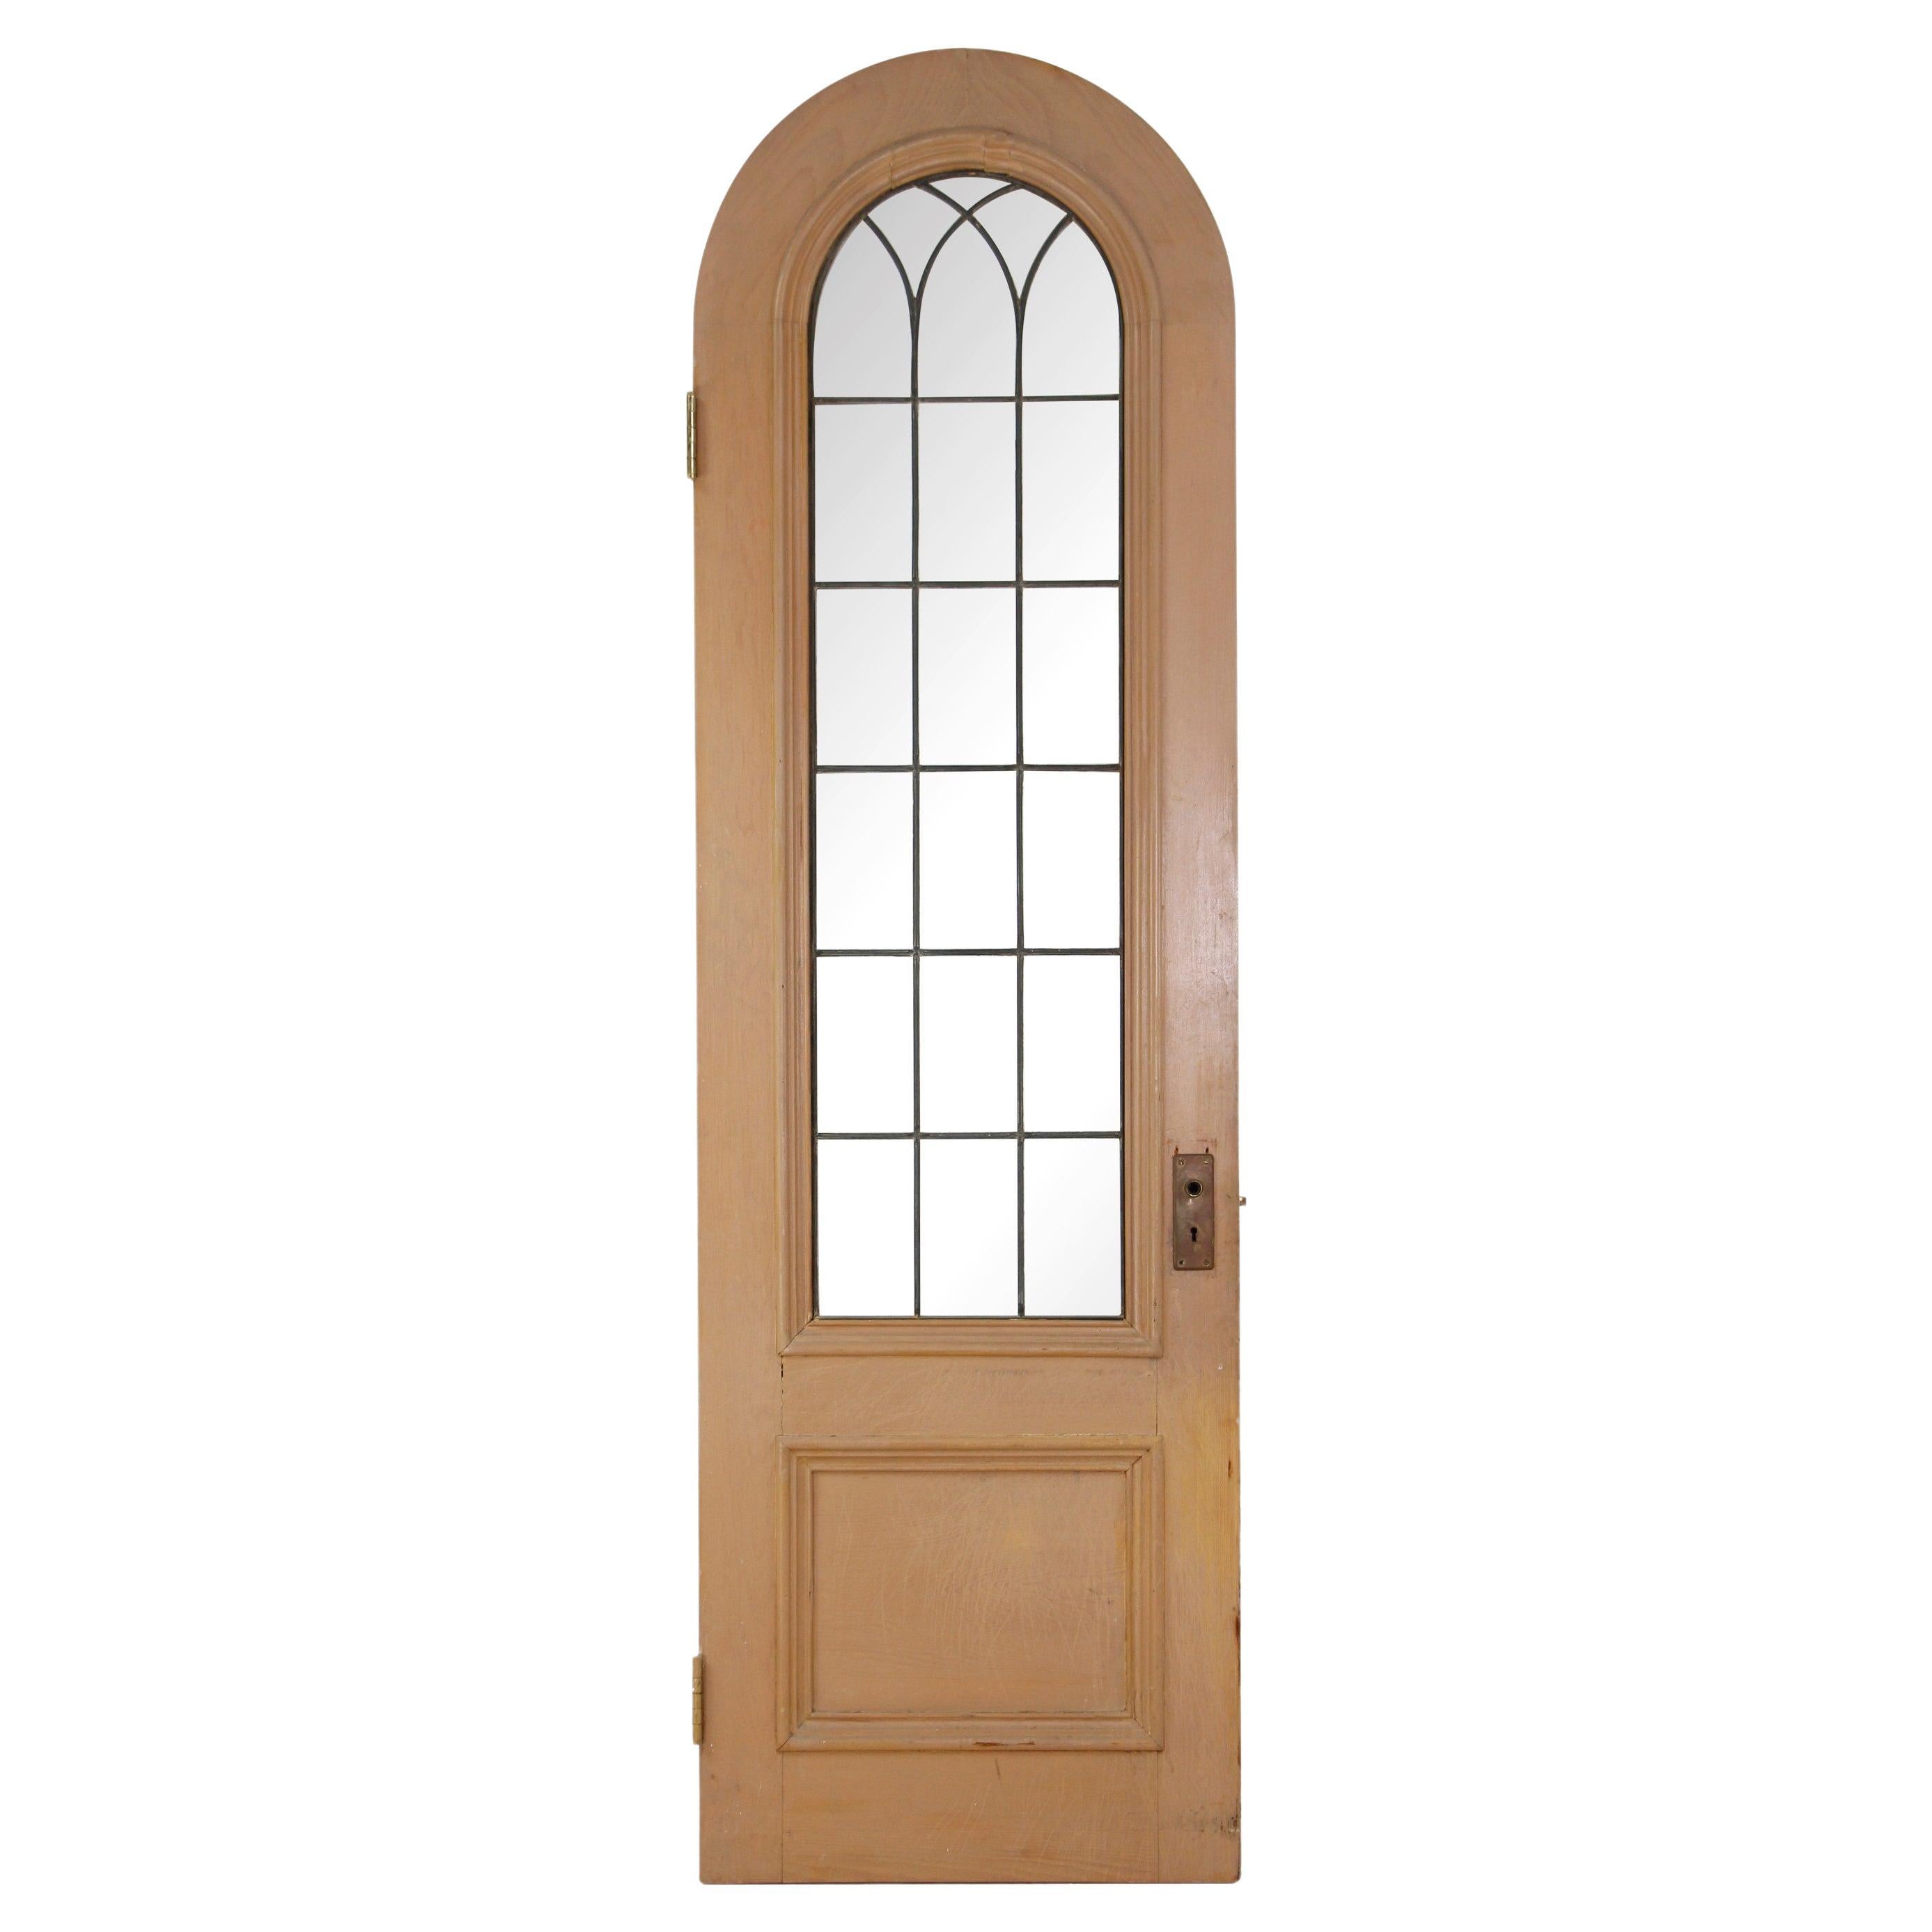 Arch Wood Door with 21 Leaded Glass Windows Bottom Panel